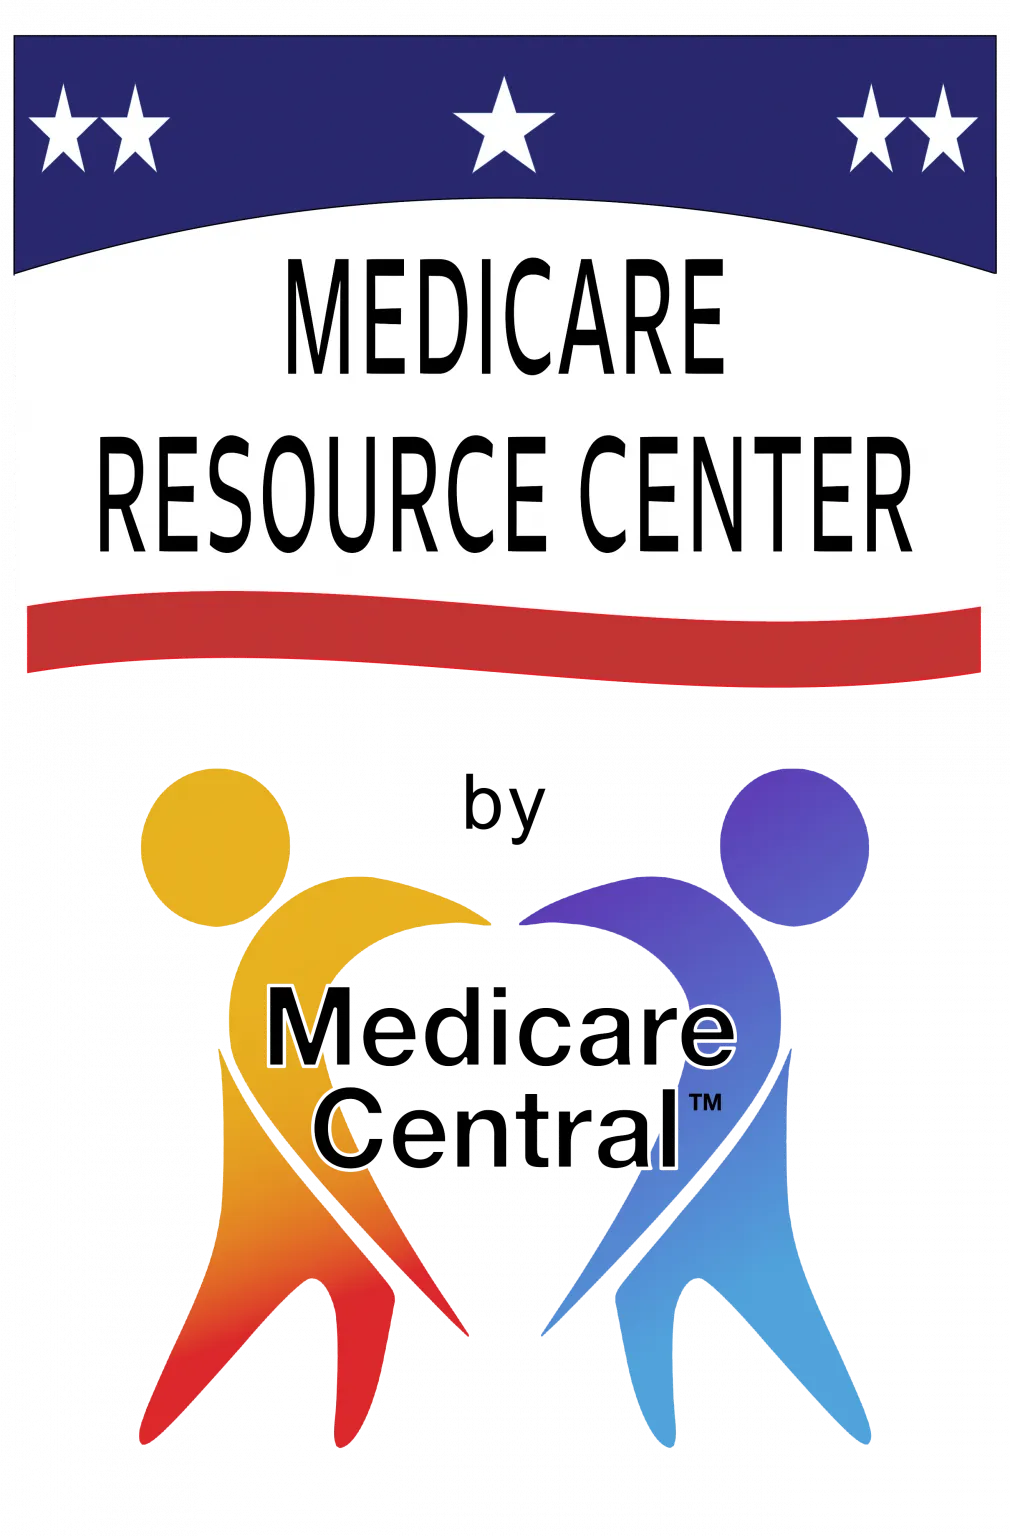 San Diego Medicare Resource Center is open year long to help you with your Medicare questions.